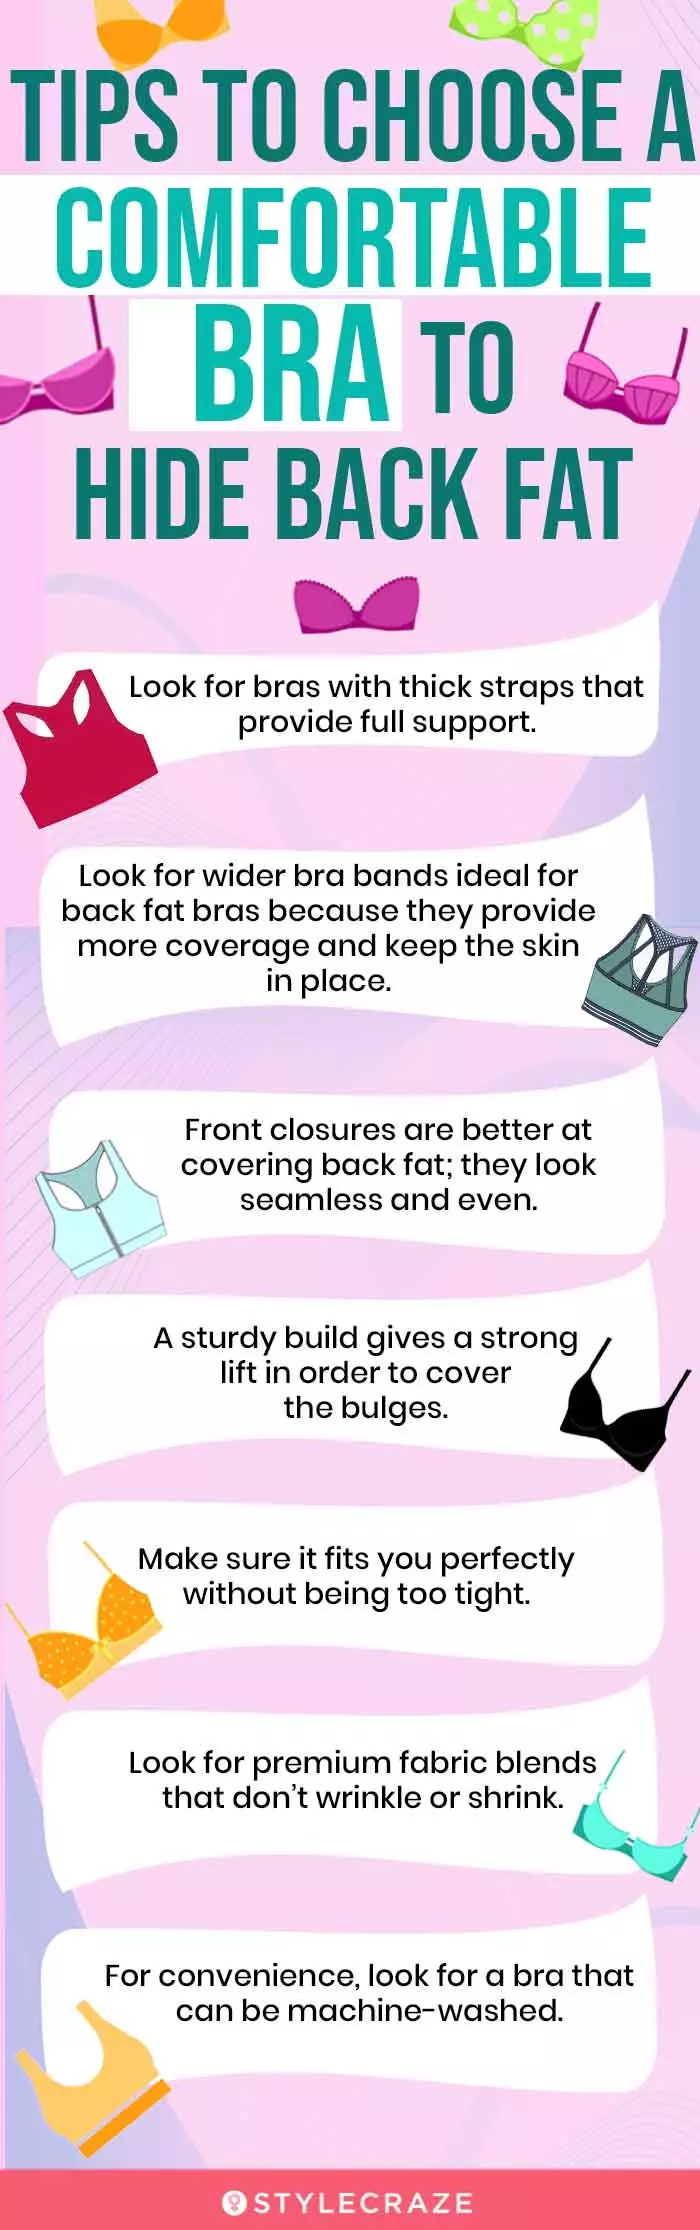 Tips To Choose A Comfortable Bra To Hide Back Fat